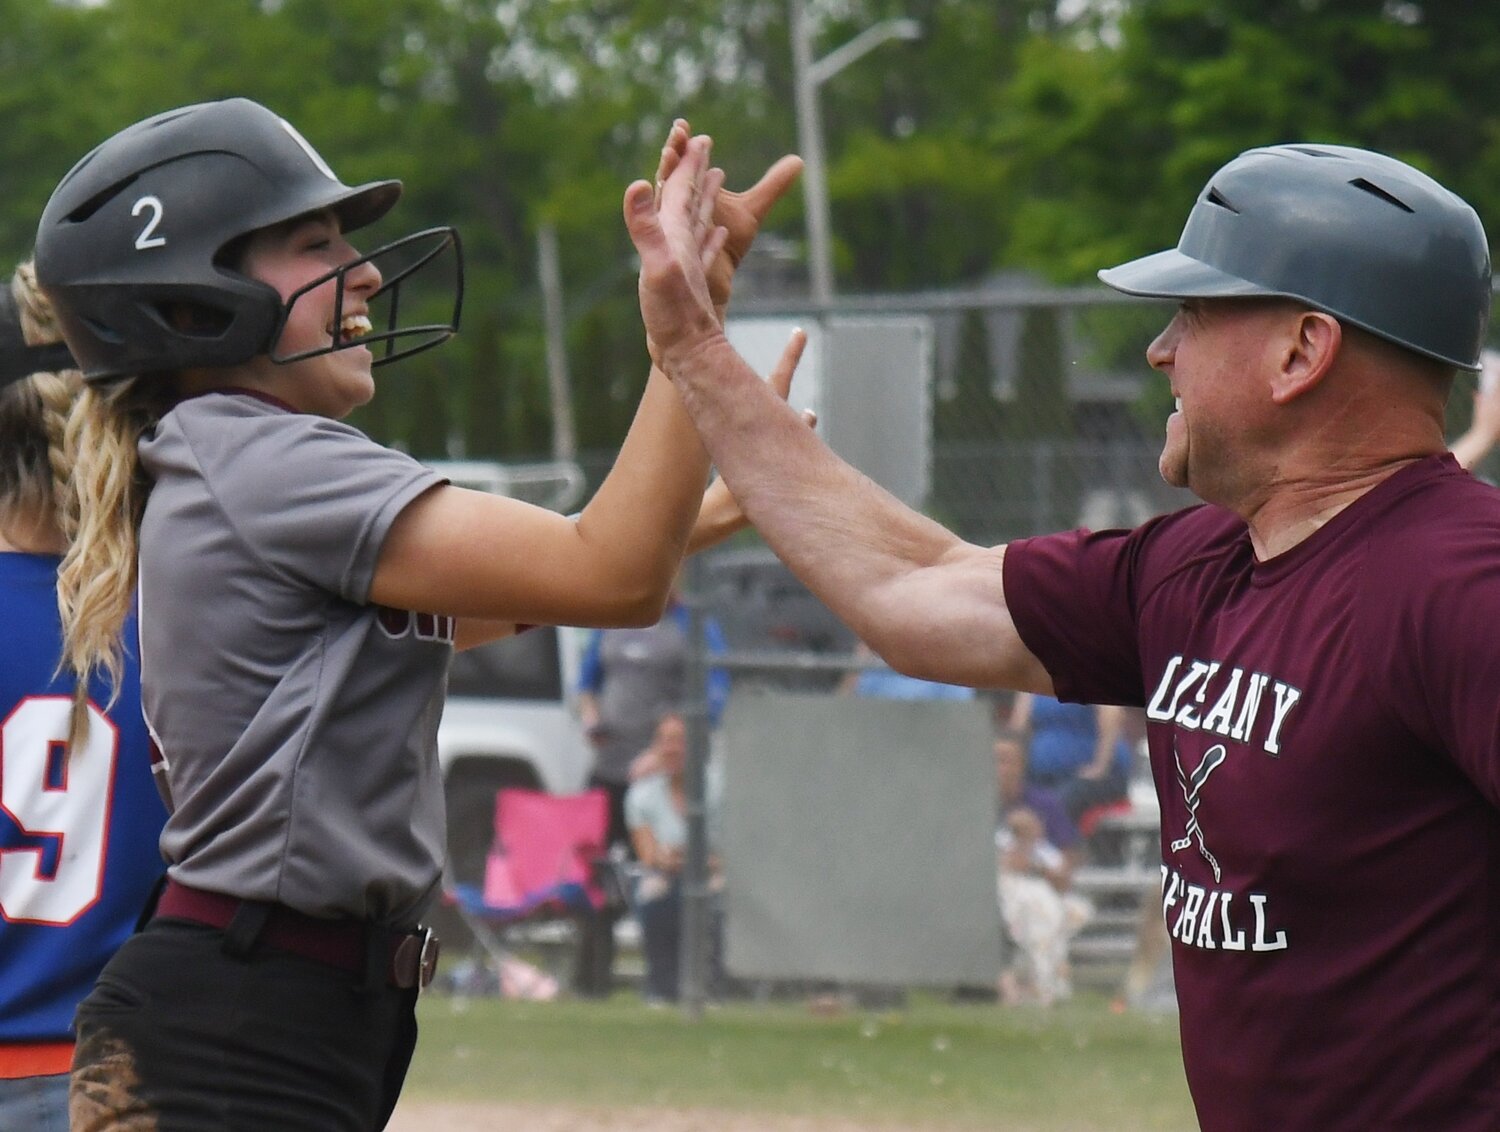 Oriskany’s Juliet Tagliaferri celebrates her walkoff triple with coach Mike Reilly on Friday against visiting Poland. Tagliaferri also earned the win in the circle with Oriskany’s 3-2 victory.